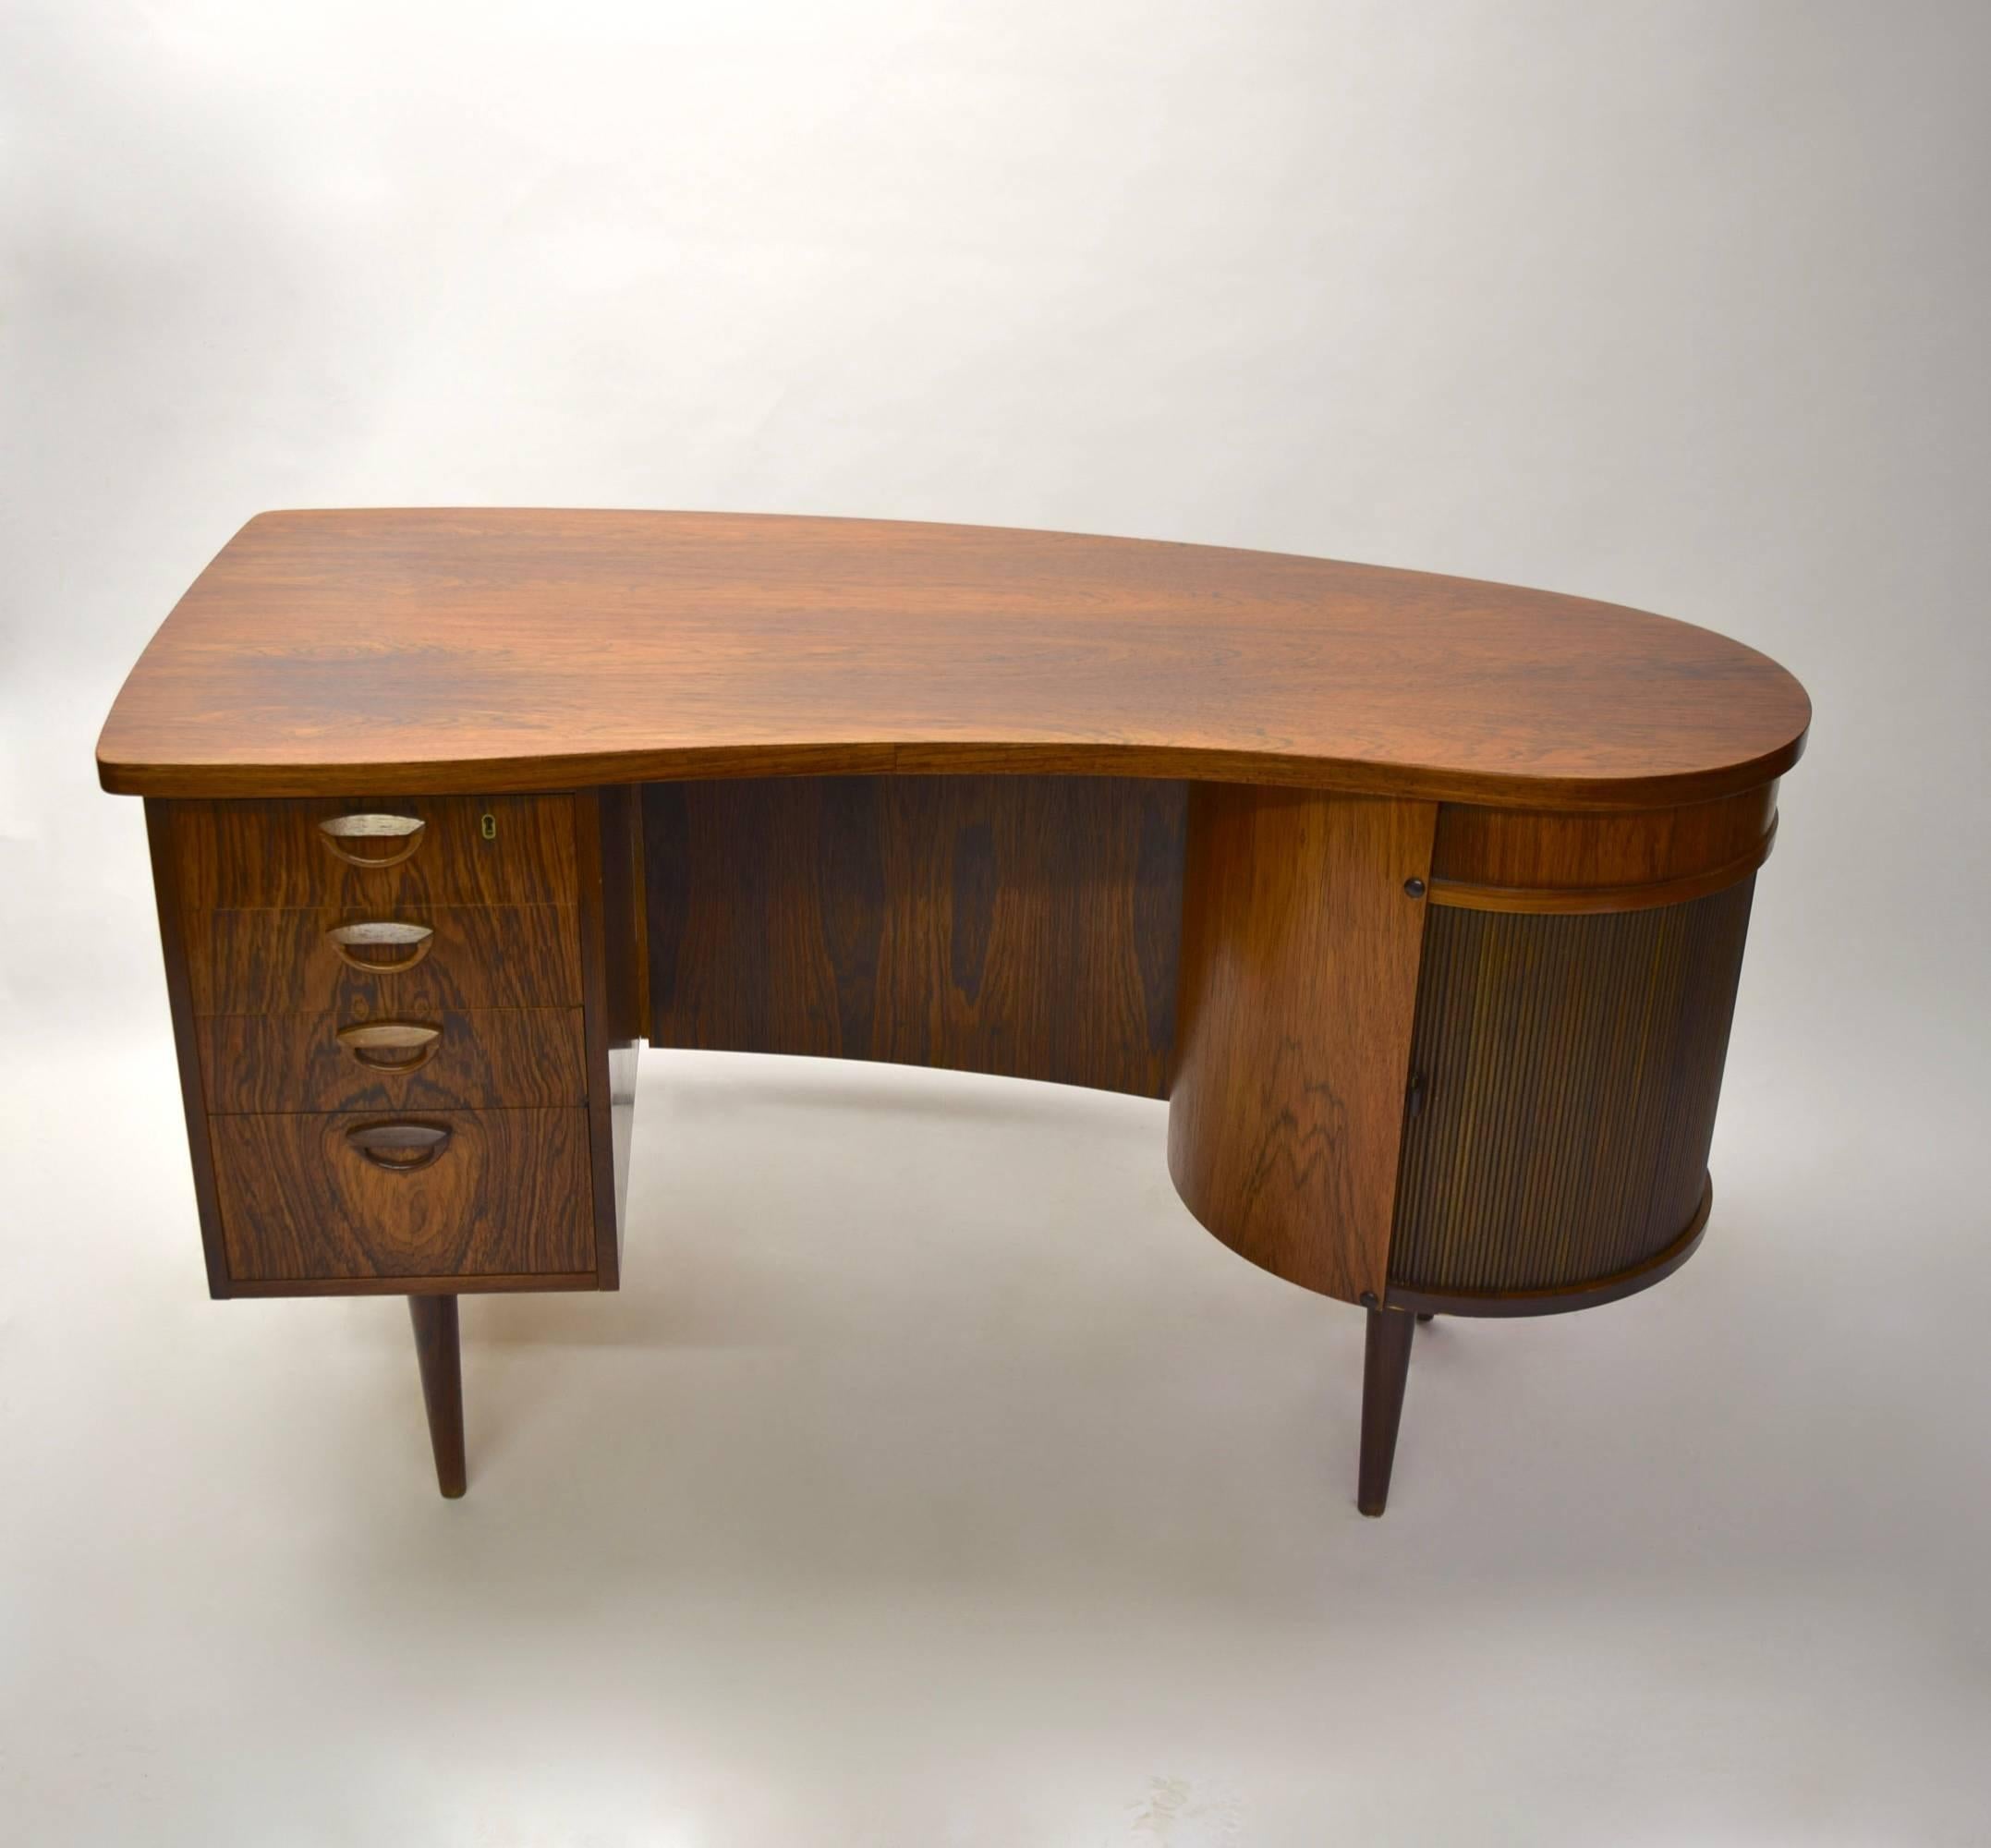 Desk in rosewood has four drawers on the left side each with matching wood pulls. On the round right side is a home bar behind a tambour door, above is a concealed drawer. 
Model 54. Designed 1956 by Kai Kristiansen for FM Furniture, Feldballe